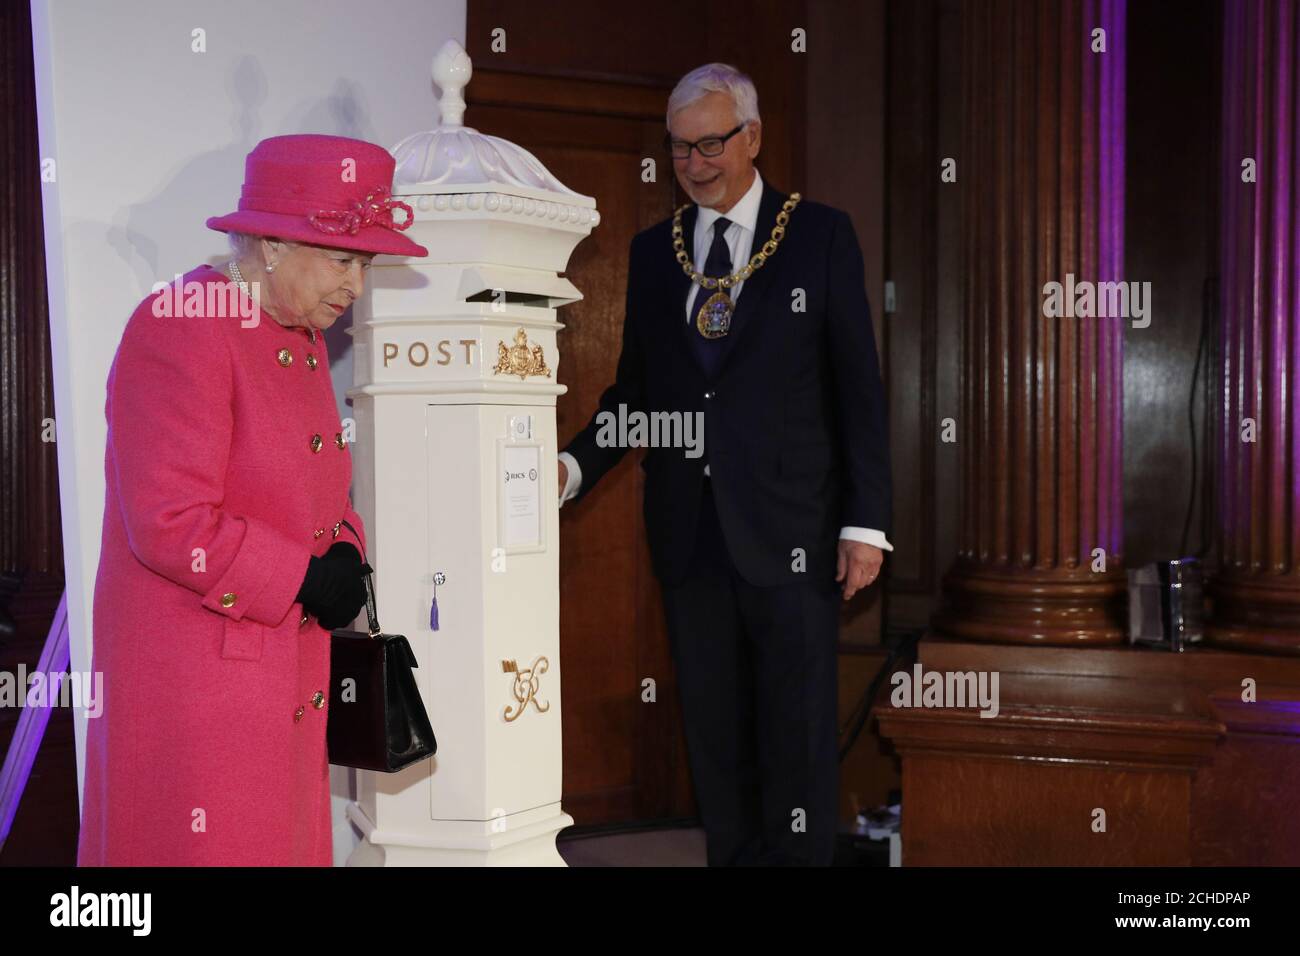 RICS President John Hughes watches as Queen Elizabeth II locks a time capsule in the form of a post box, during a visit to the Royal Institution of Chartered Surveyors (RICS) in London, to mark its 150th anniversary. Stock Photo